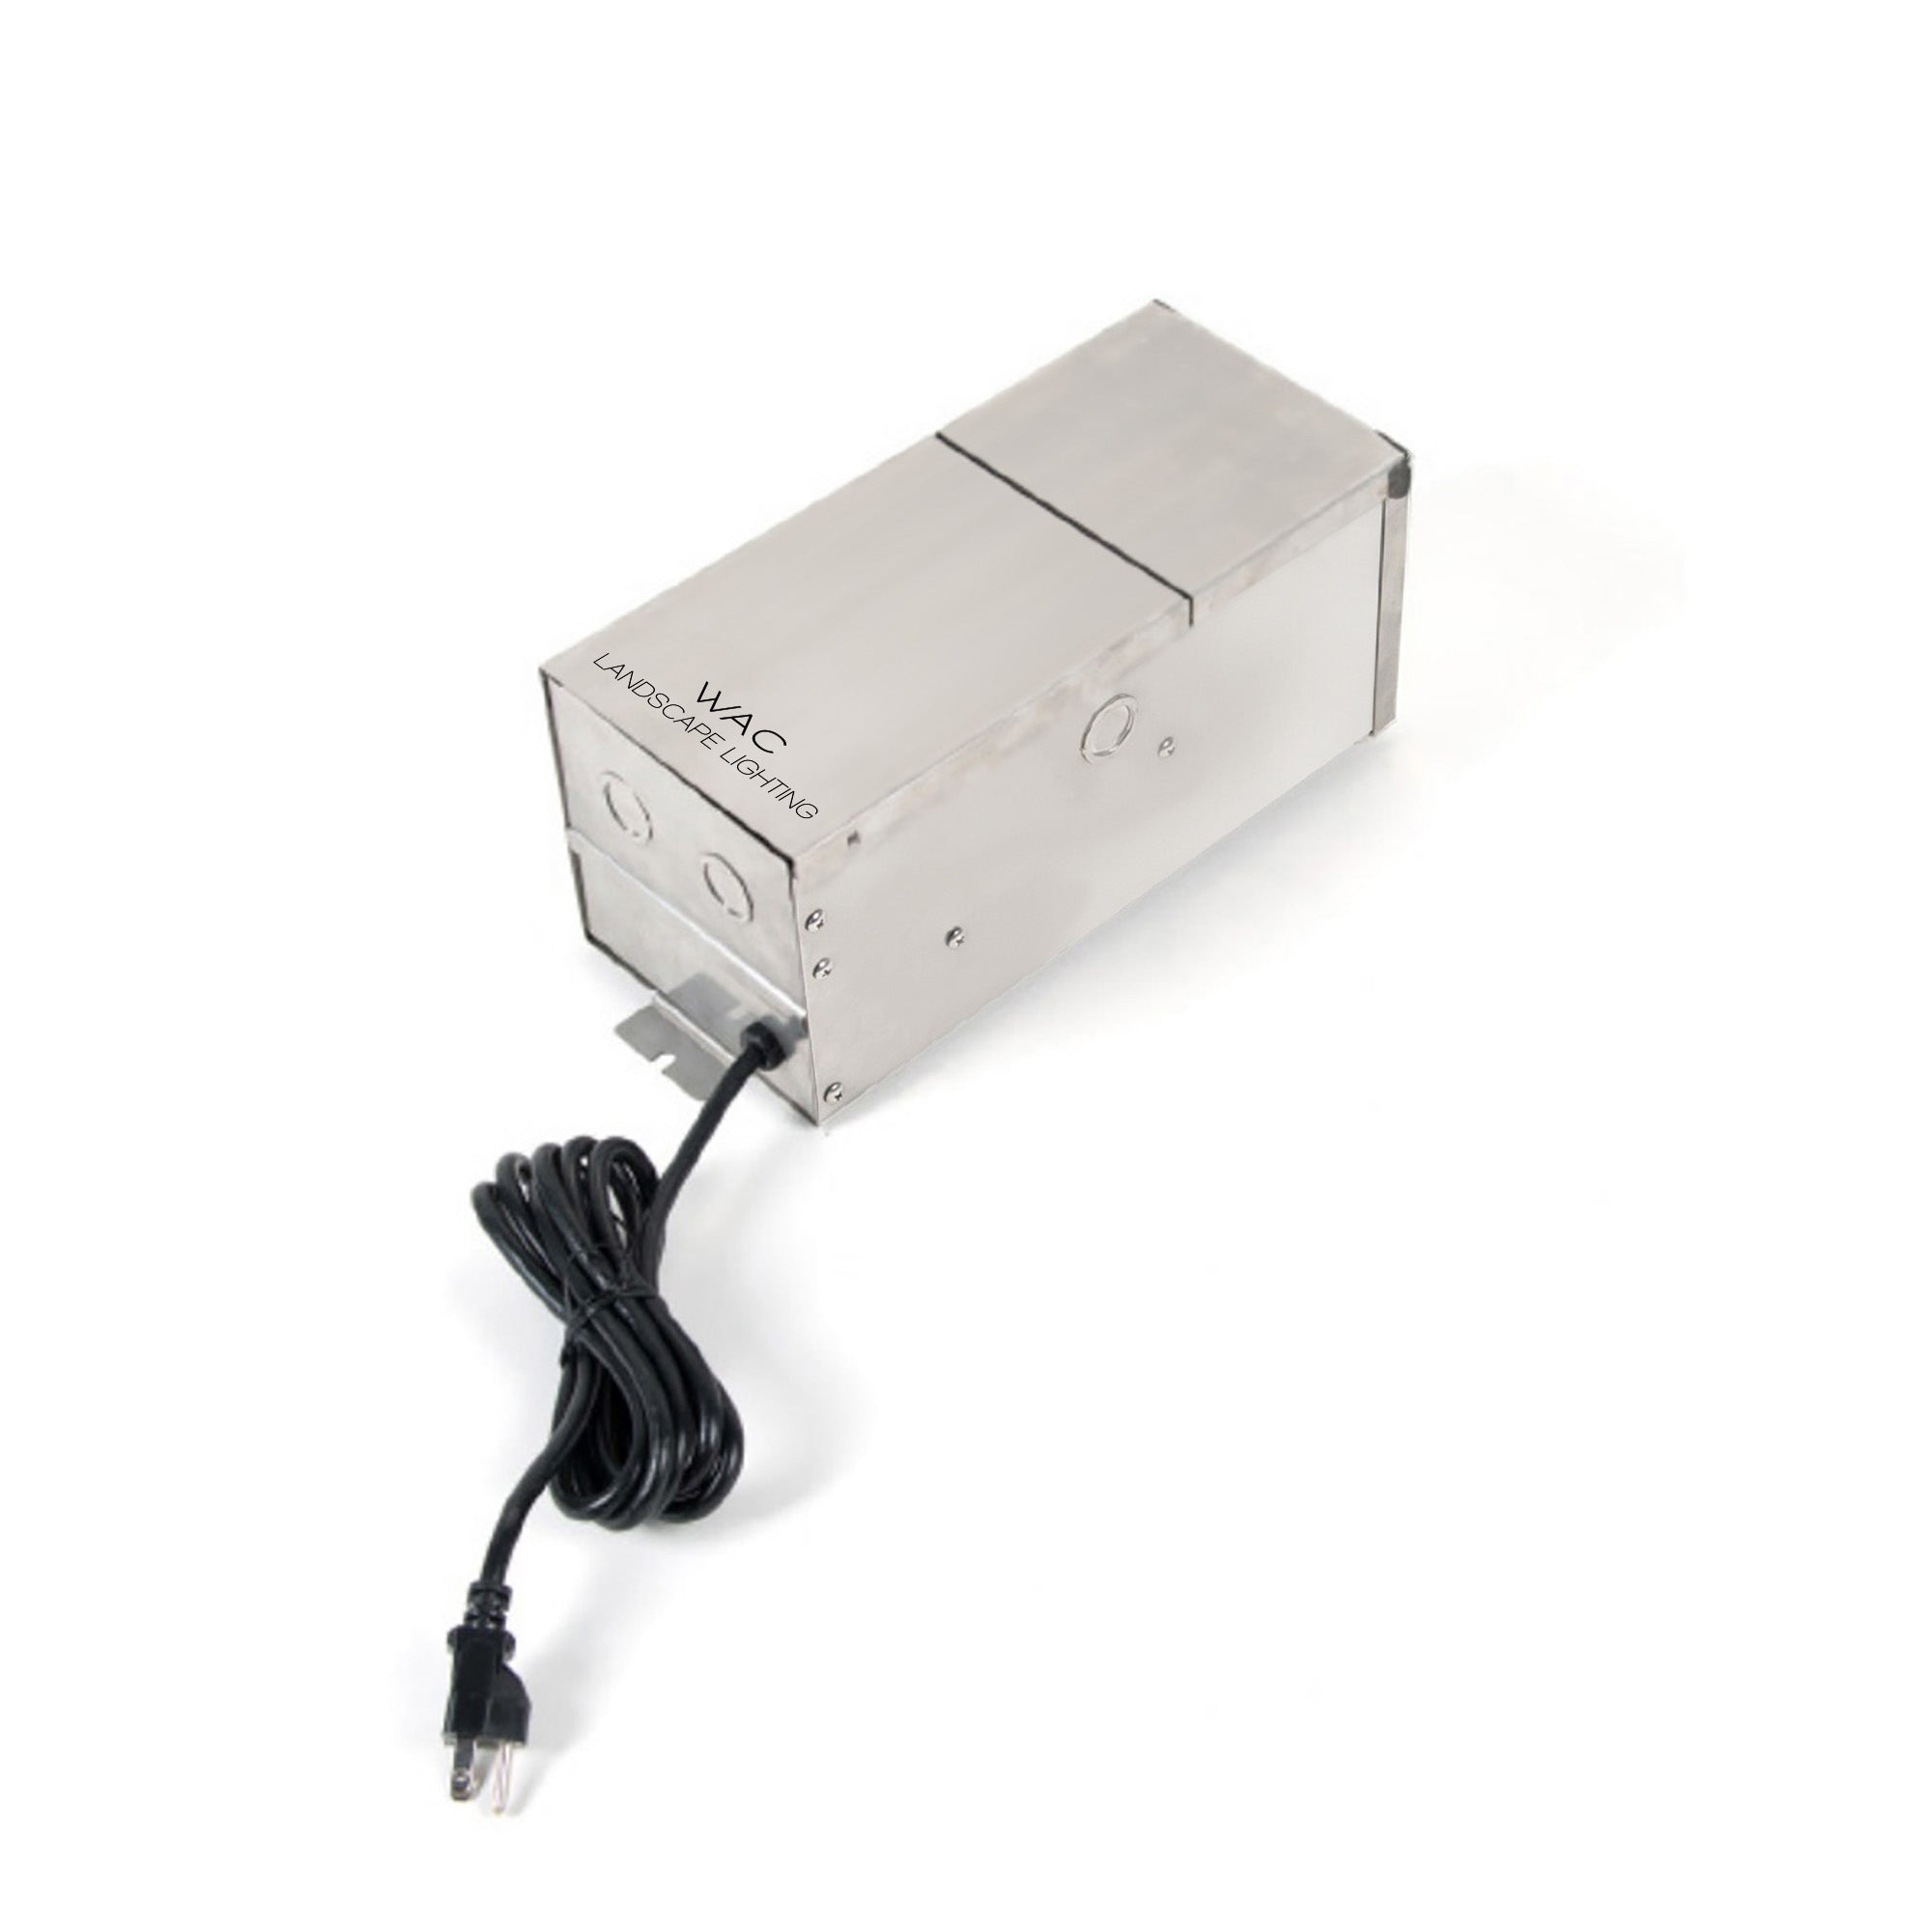 75W Stainless Steel Outdoor Landscape Lighting Magnetic Power Supply